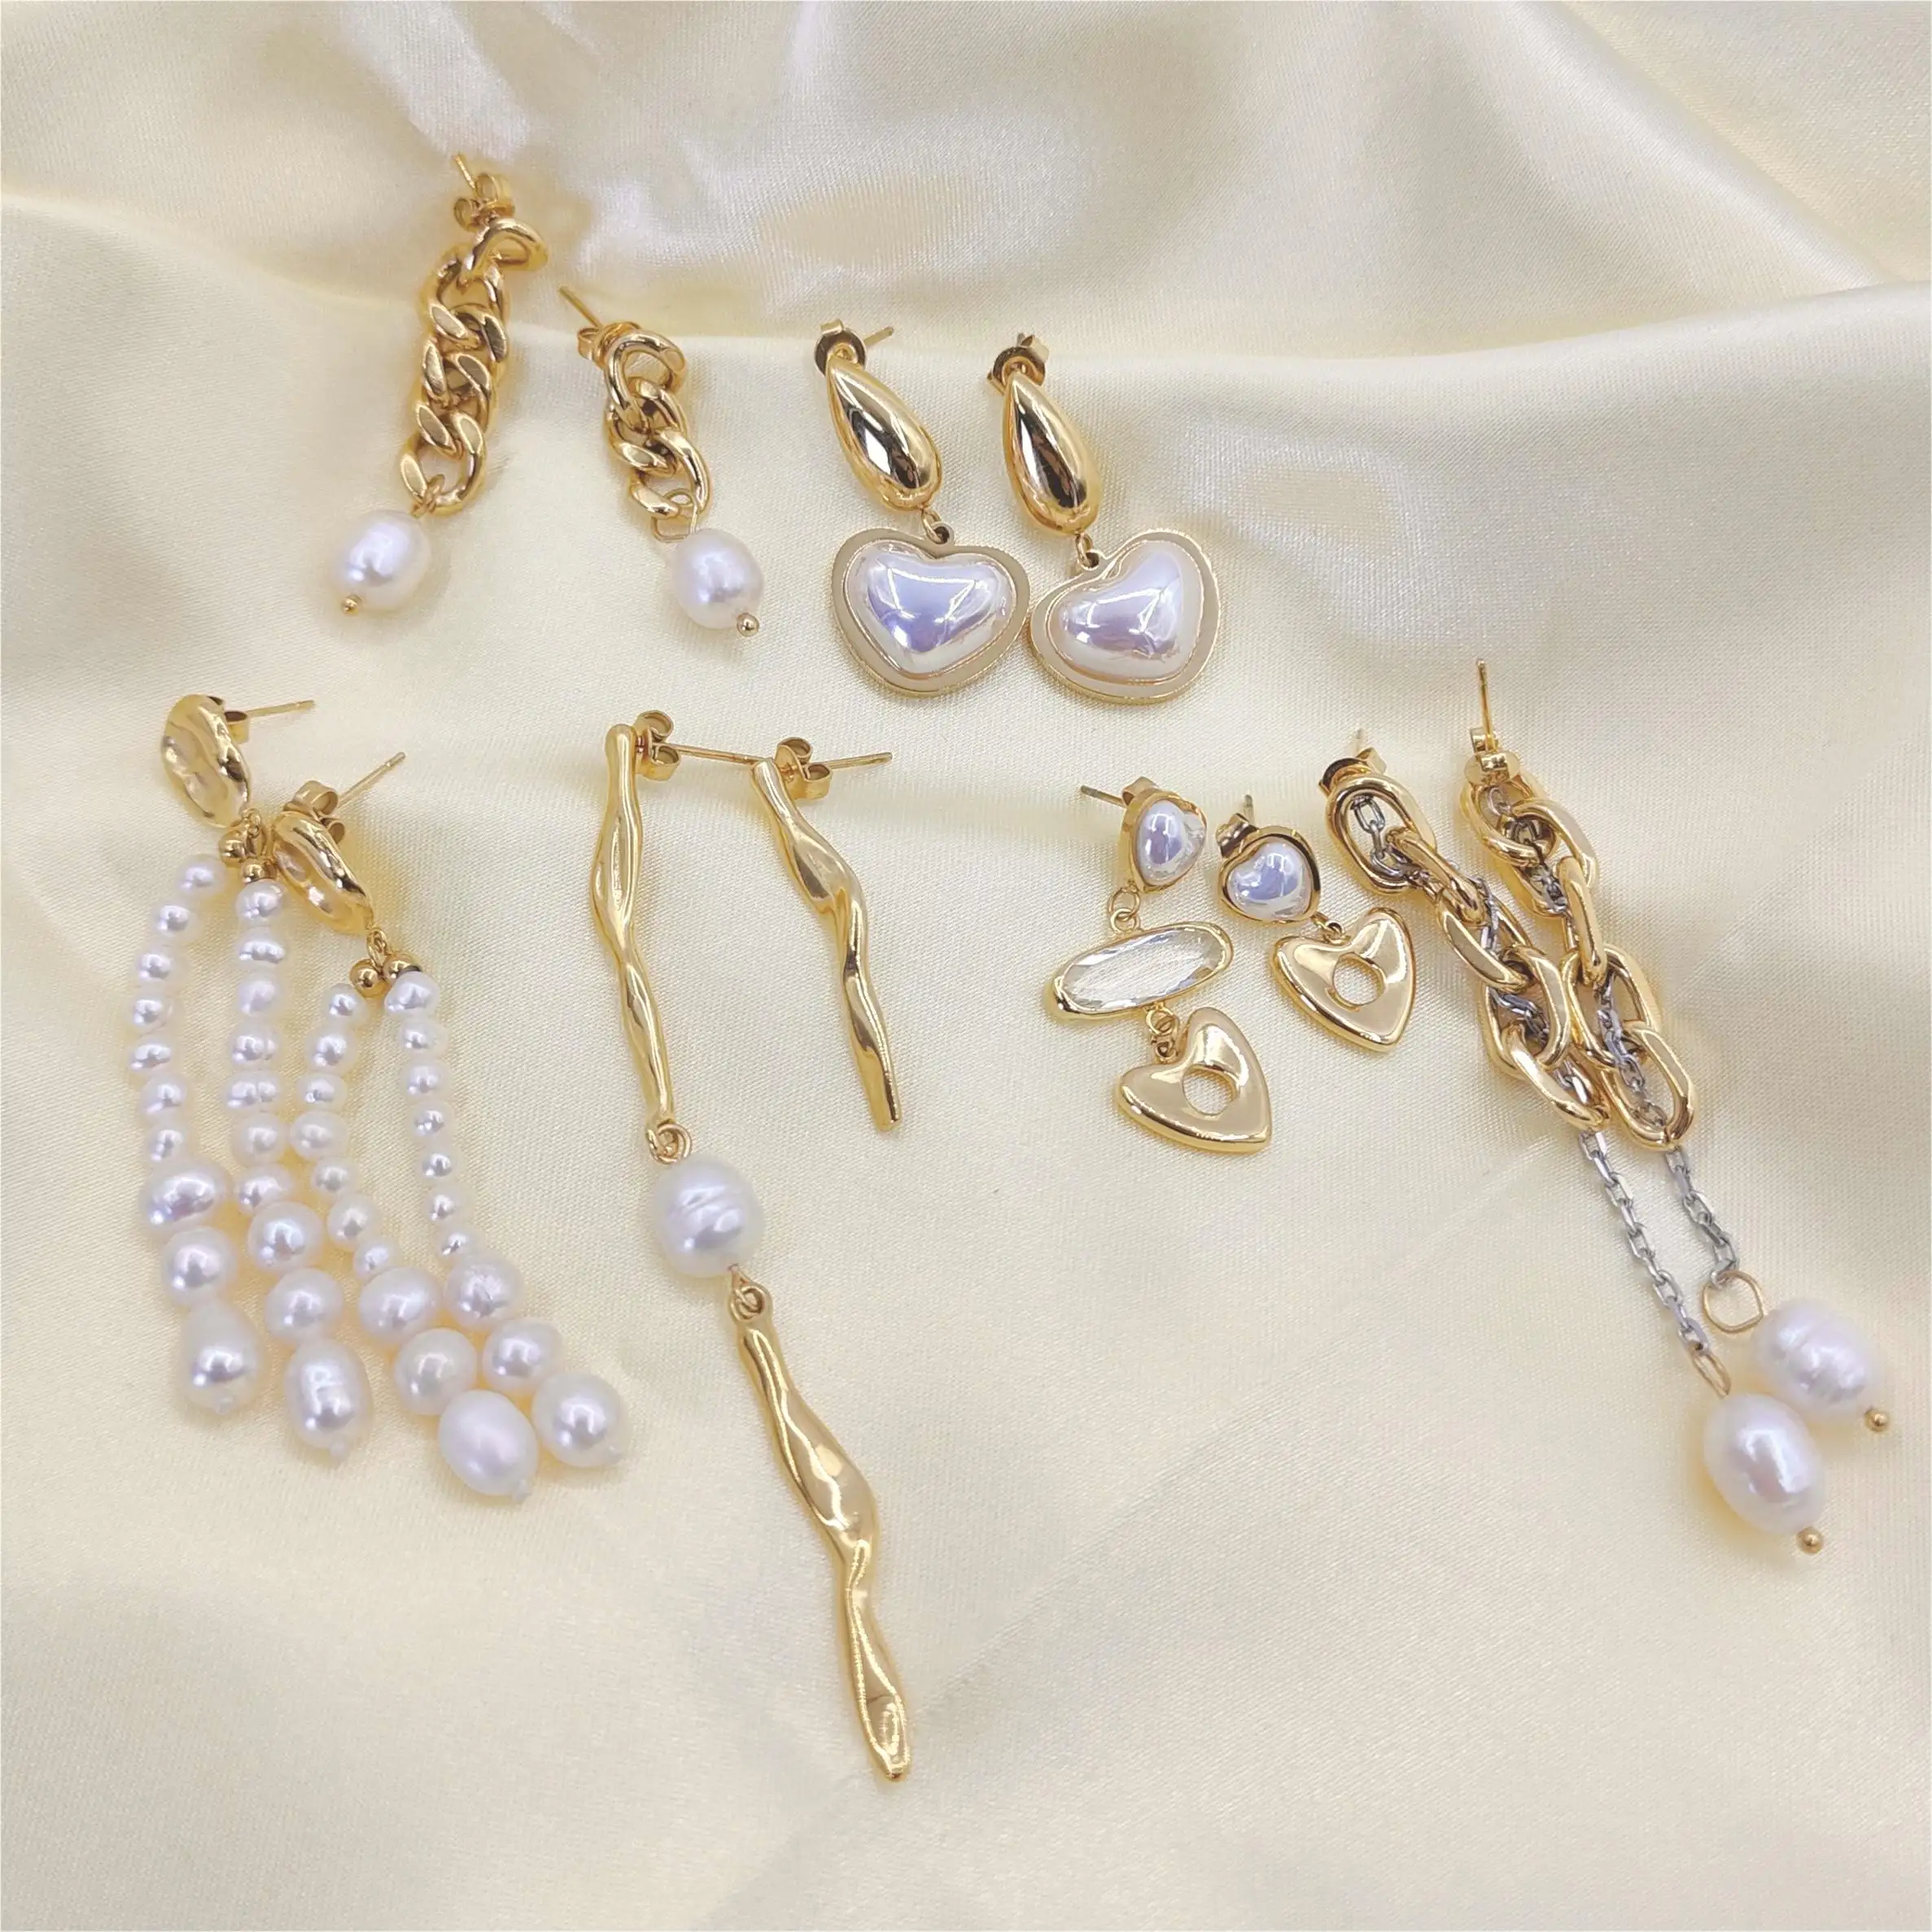 MARONEW Stainless Steel Freshwater Gold Plated Hypoallergenic Baroque Long Drop Statement Stud Pearl Earrings Set Women Brinco